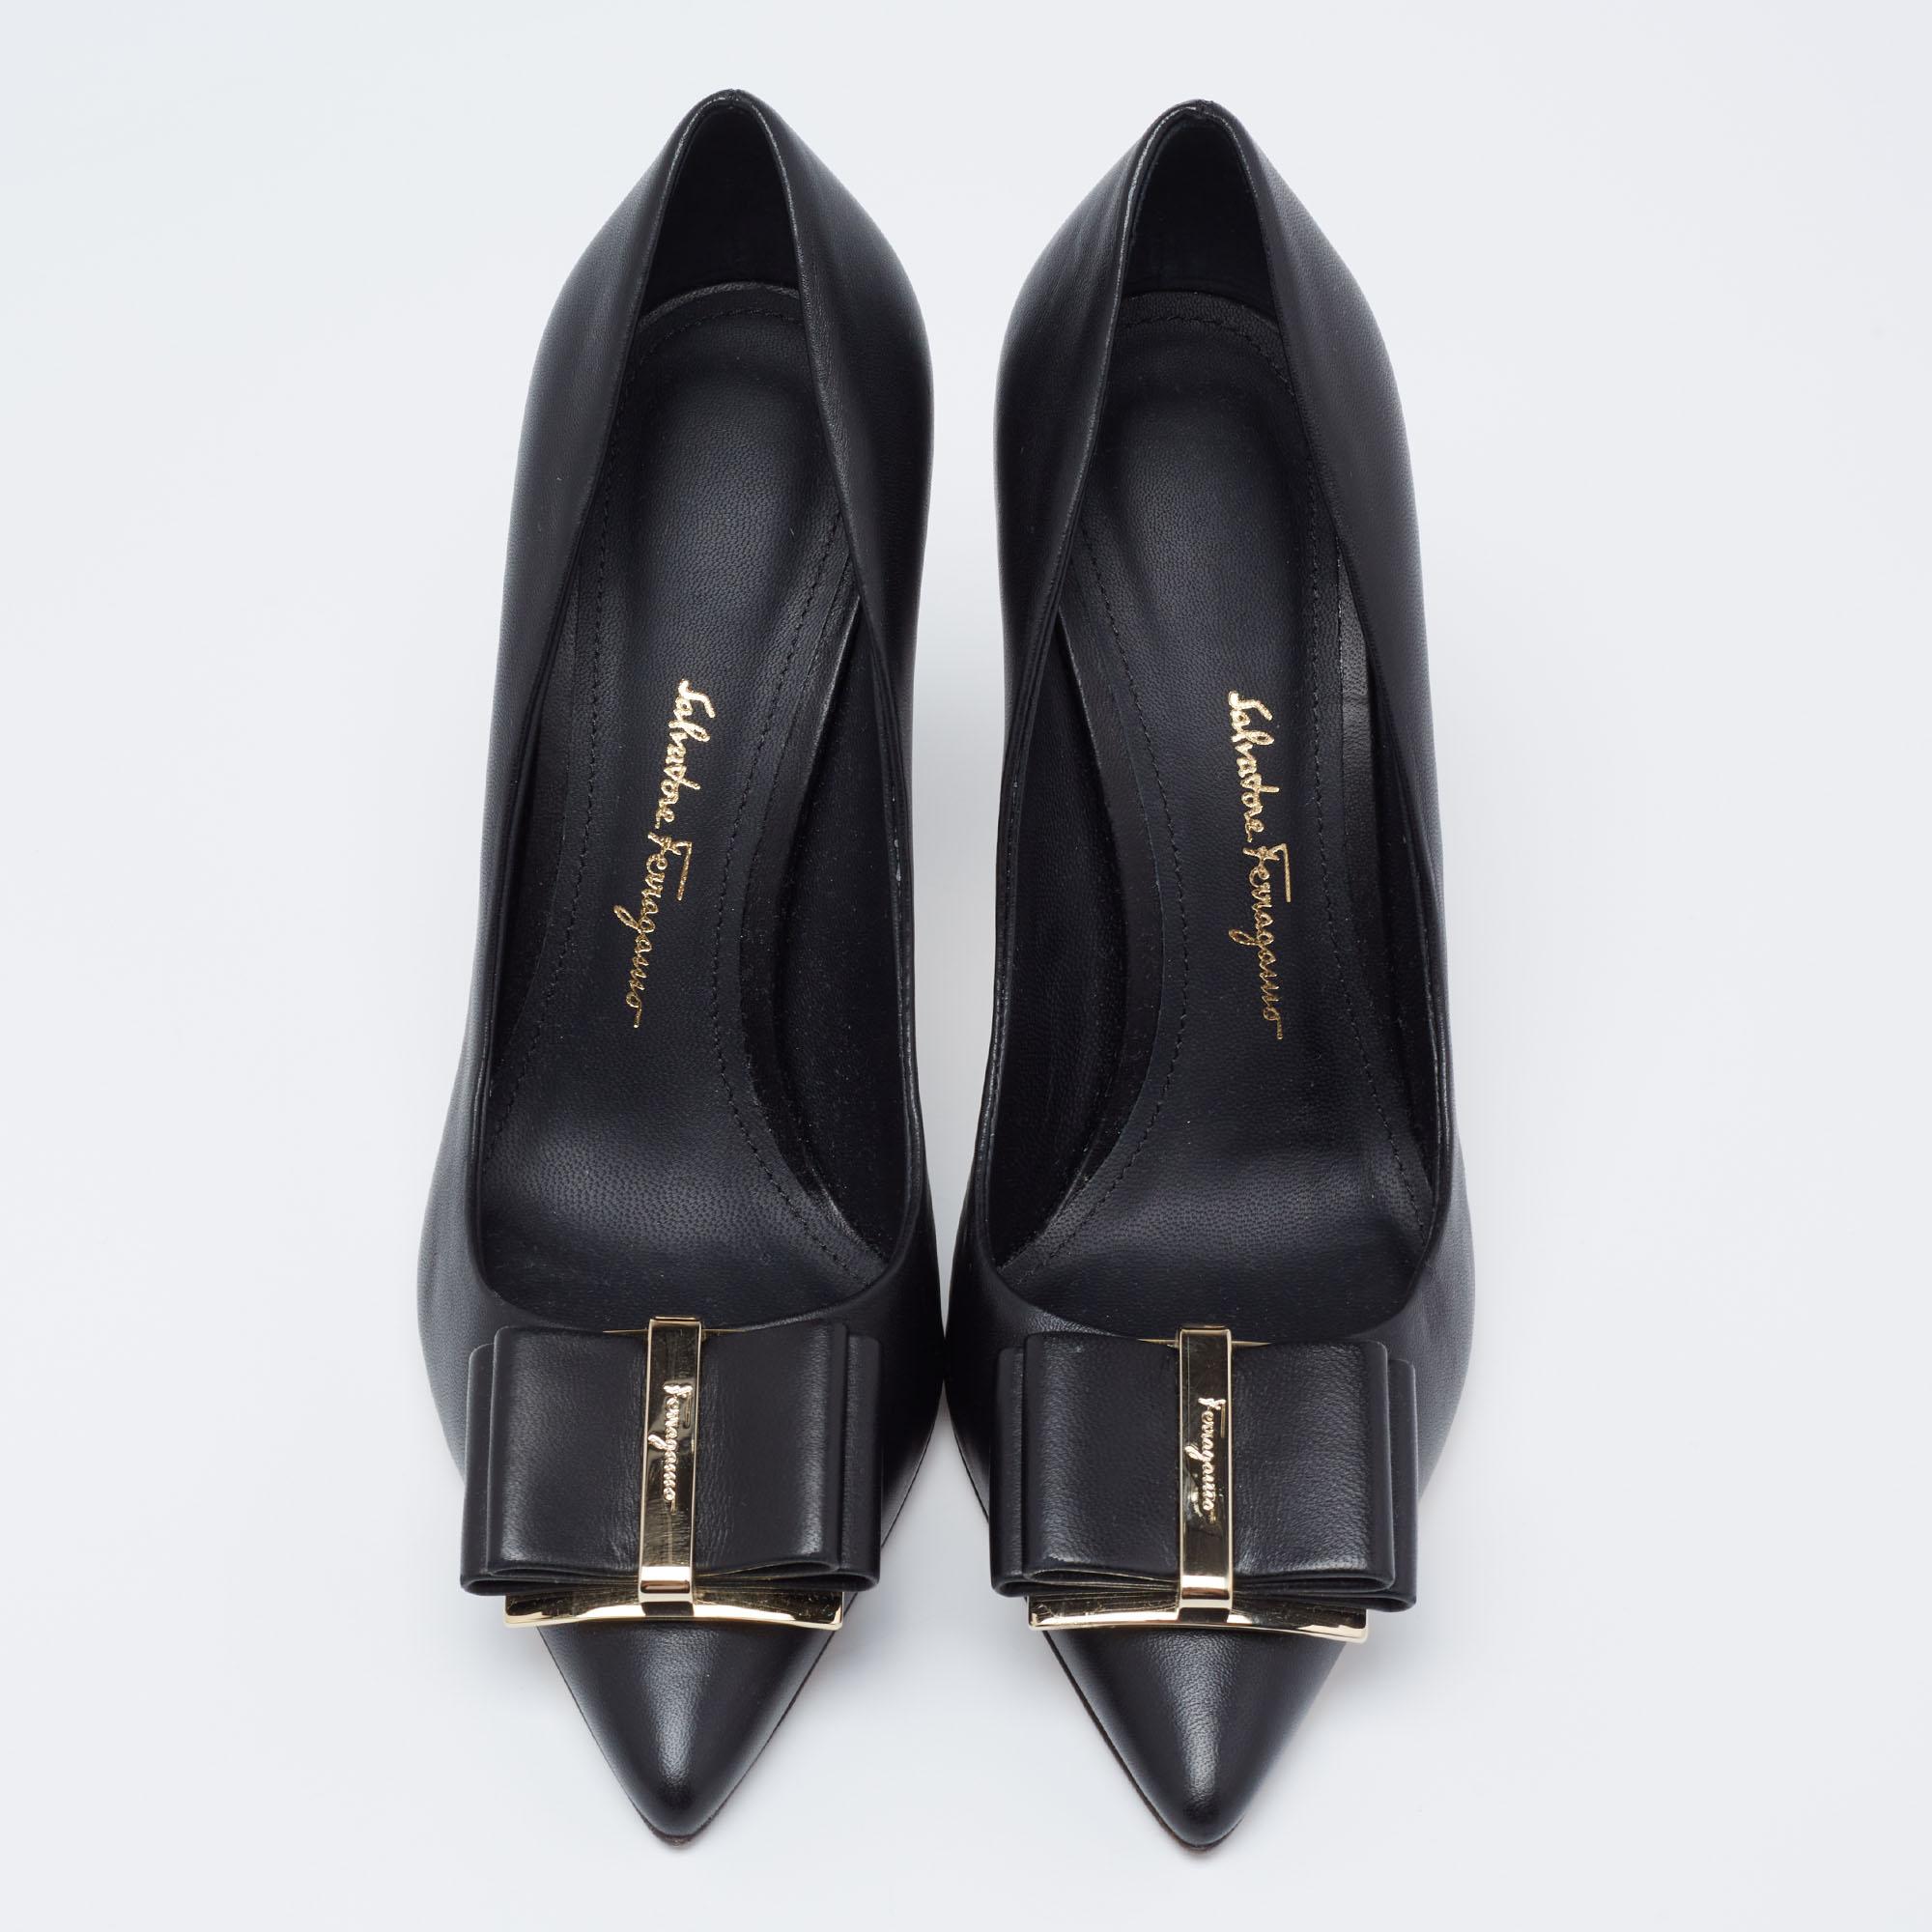 Characterized by its clean, impressive silhouette, these pumps showcase the Salvatore Ferragamo's flair in the art of shoemaking. The pair flaunts a contemporary hue. From formal to casual and evening looks, this gorgeous pair will look great on all